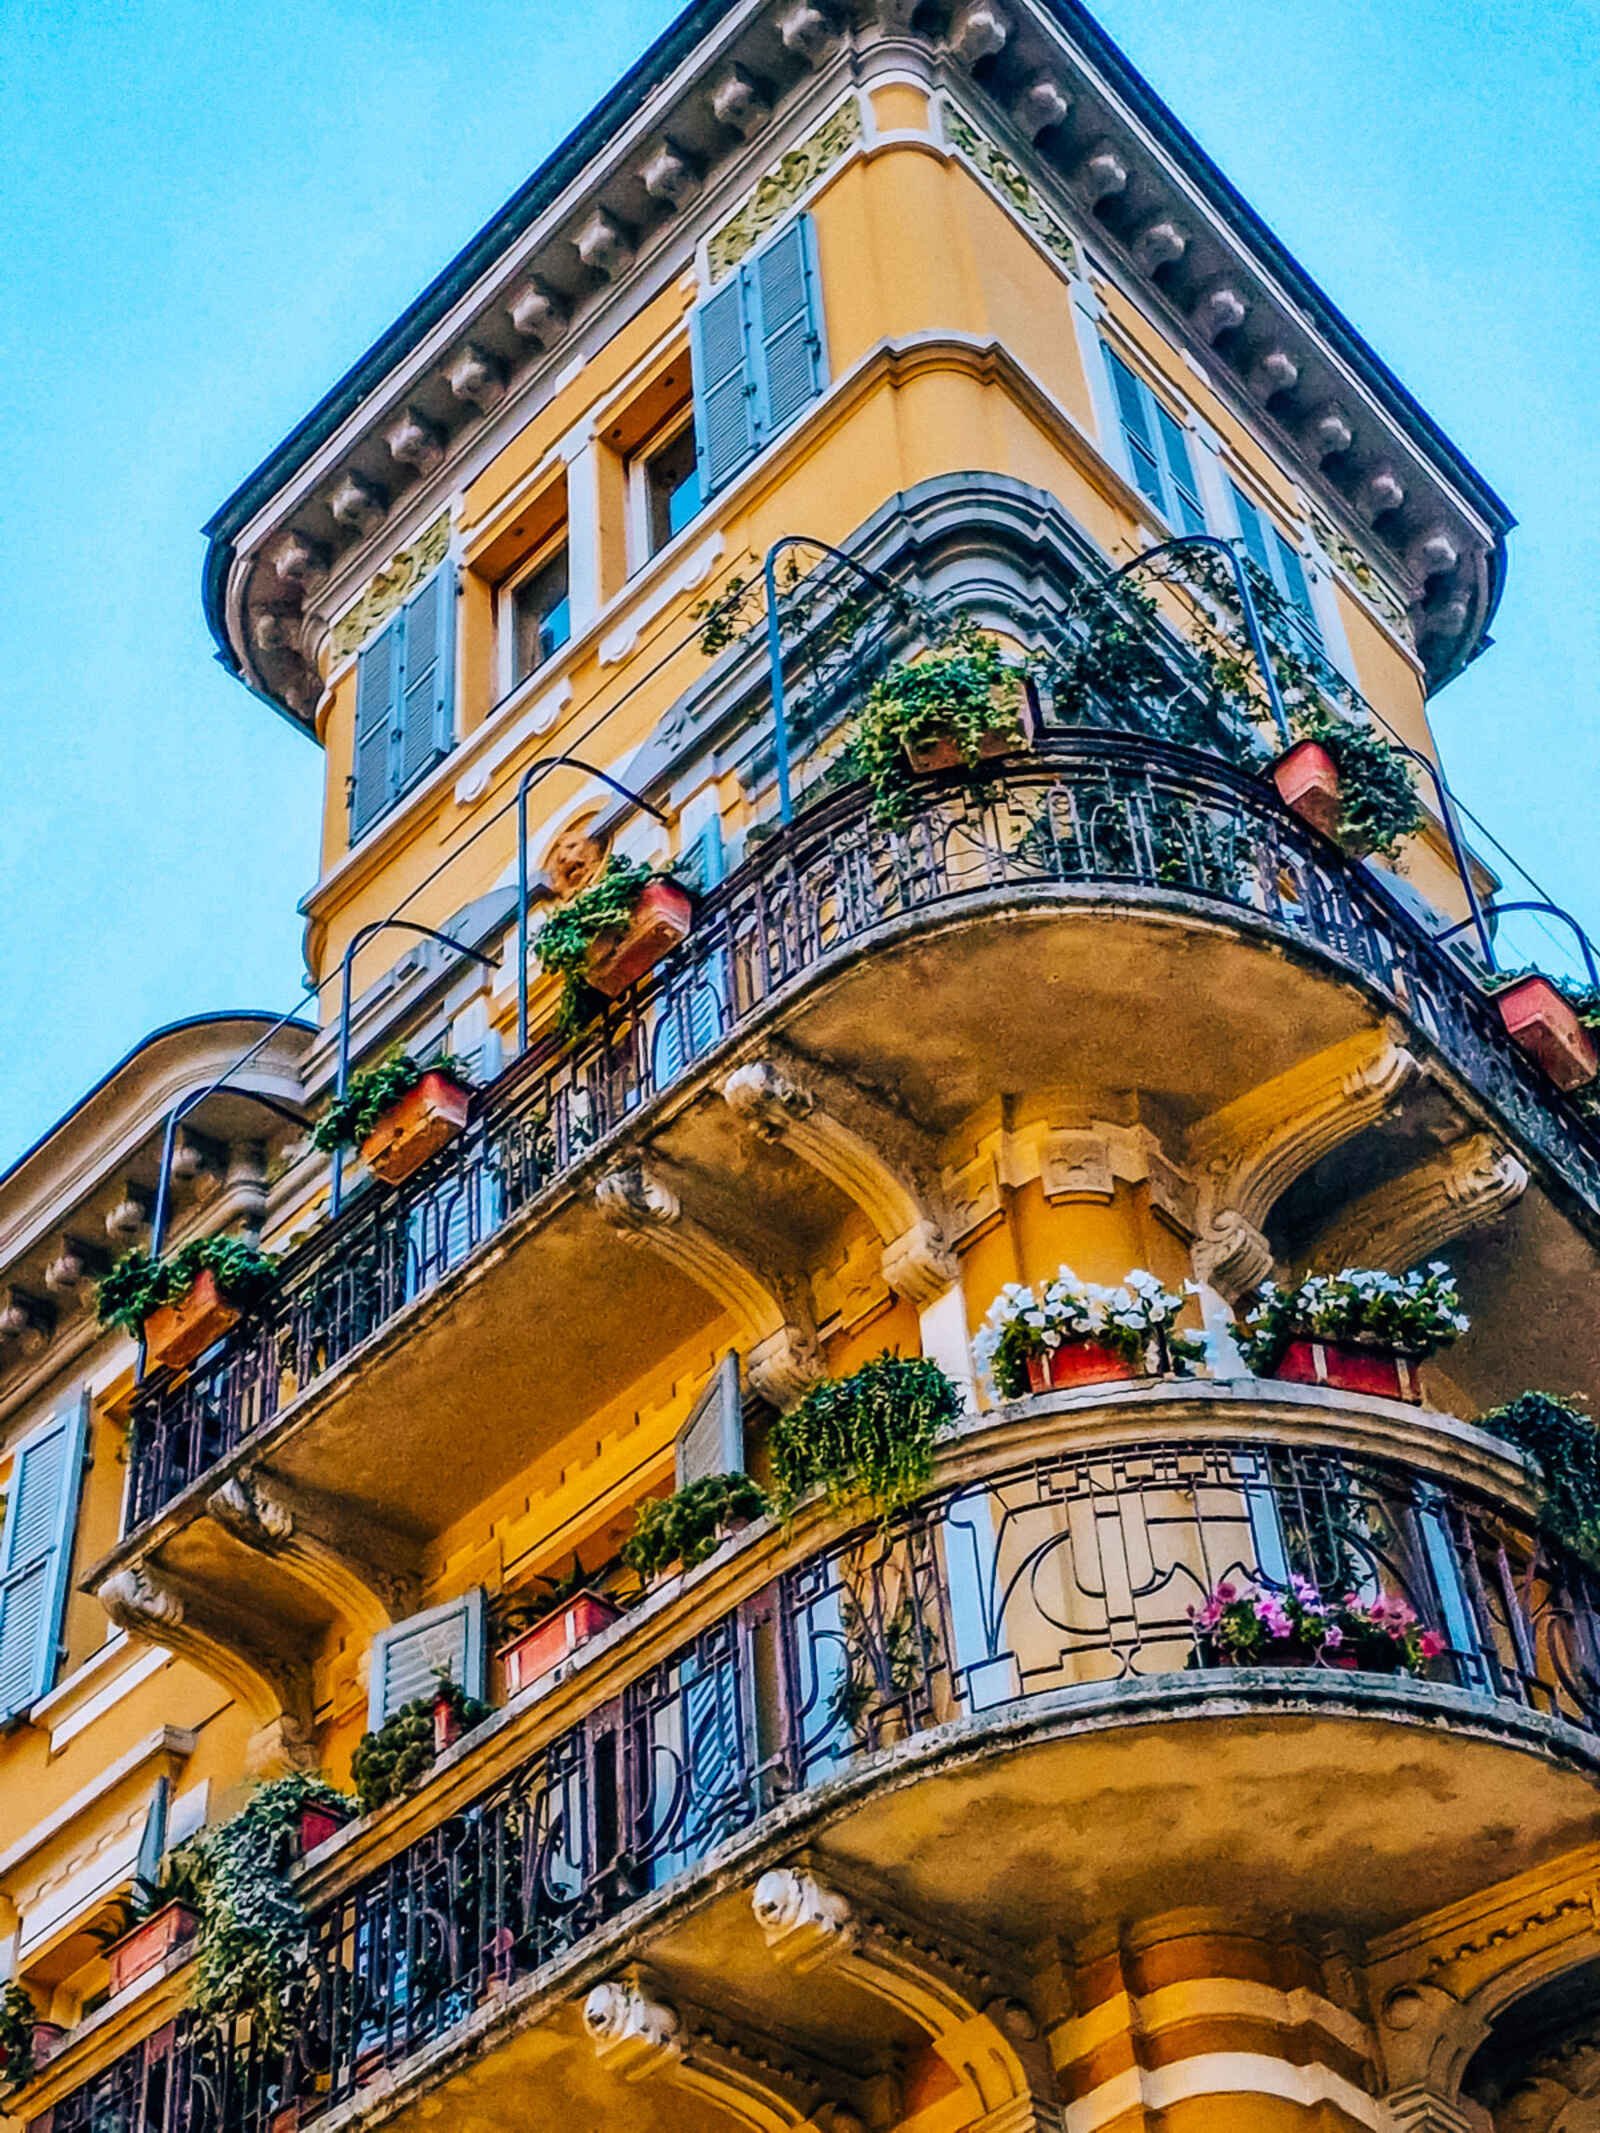 An ornate old yellow building with black railed balcony's covered in plants